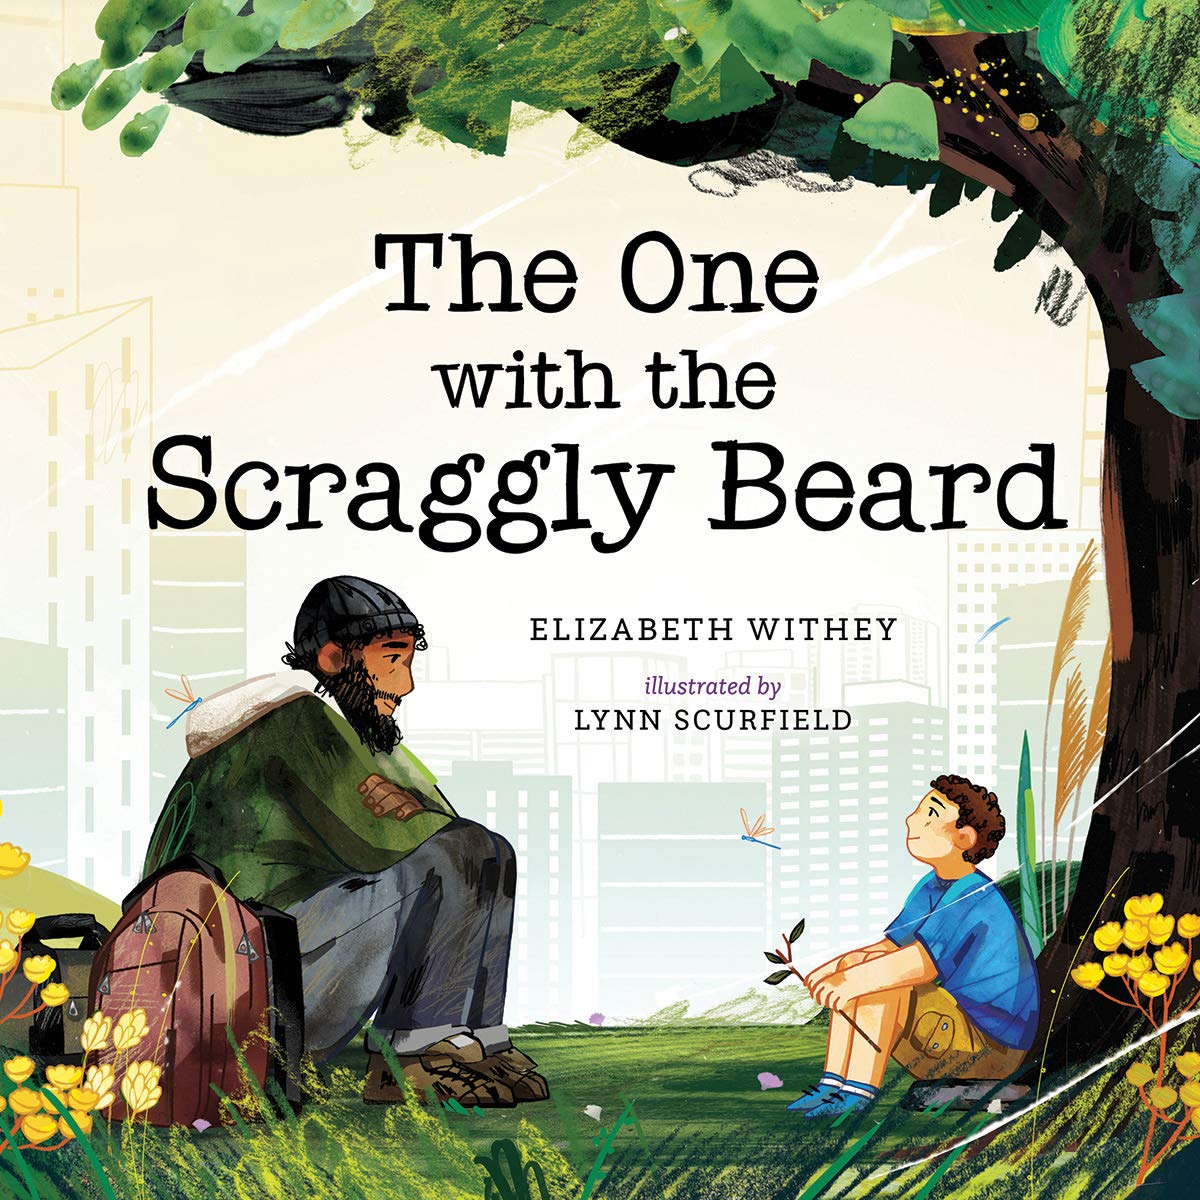 Front cover image of The One with the Scraggly Beard of a brown man sitting on a log with his backpack beside him talking to a boy under a tree